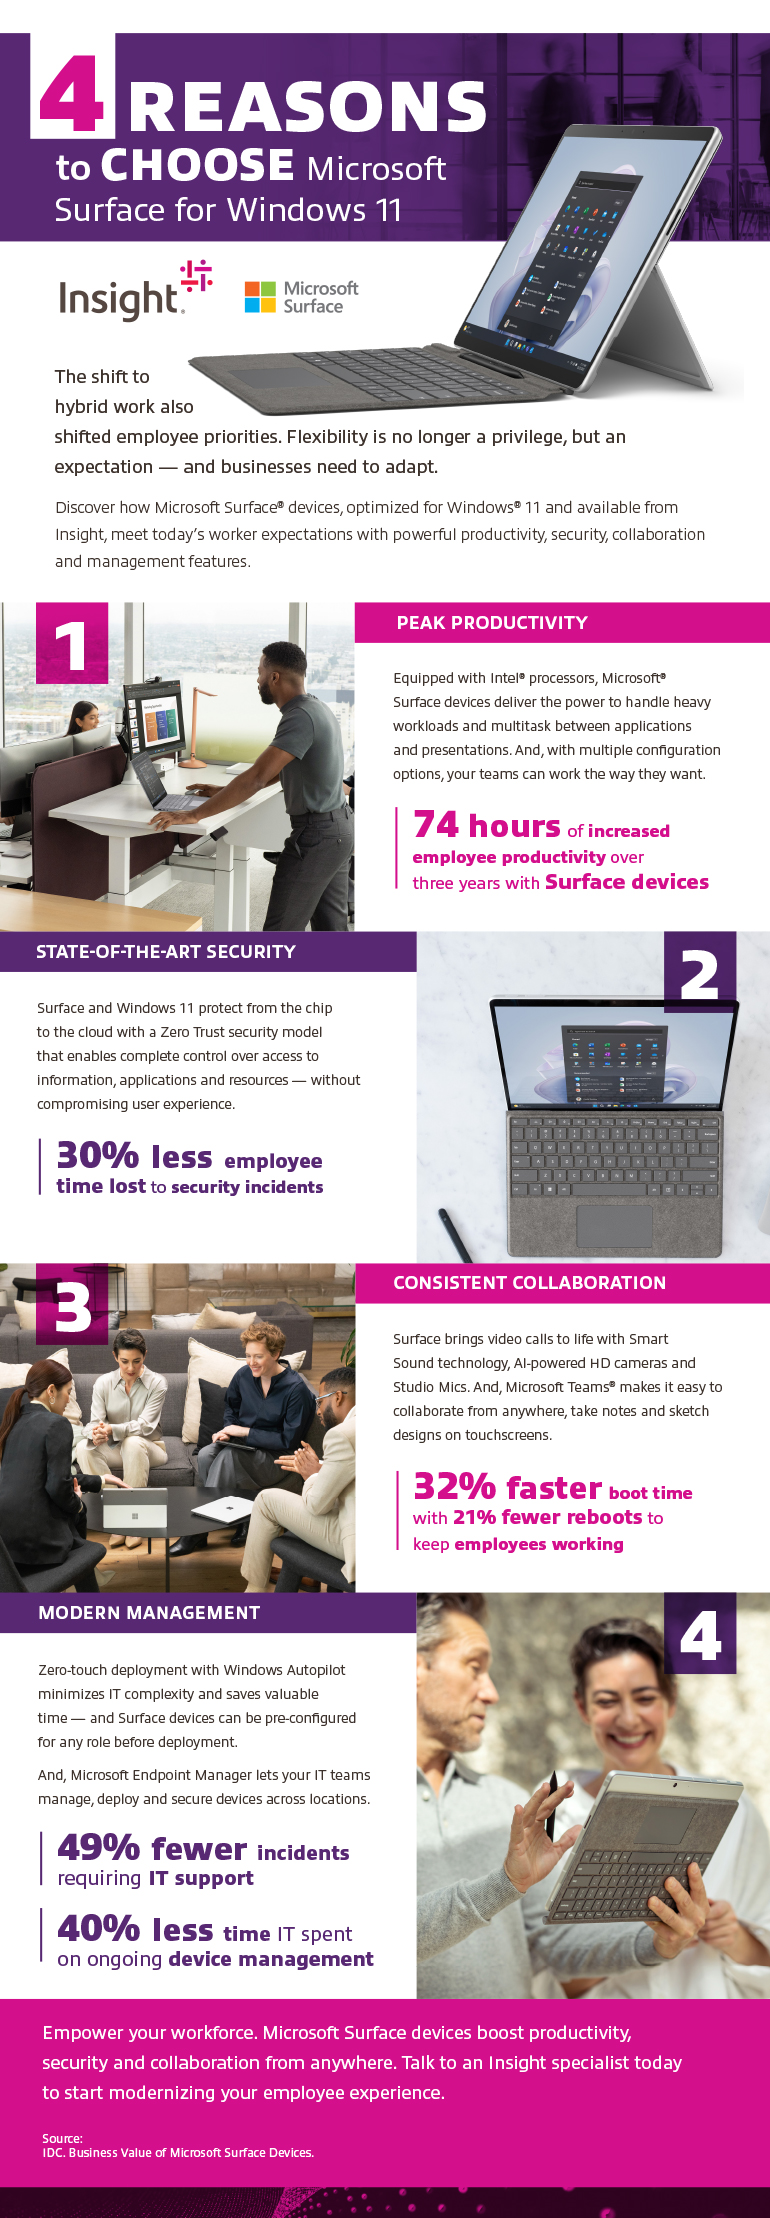 4 Reasons to Choose Microsoft Surface for Windows 11 infographic